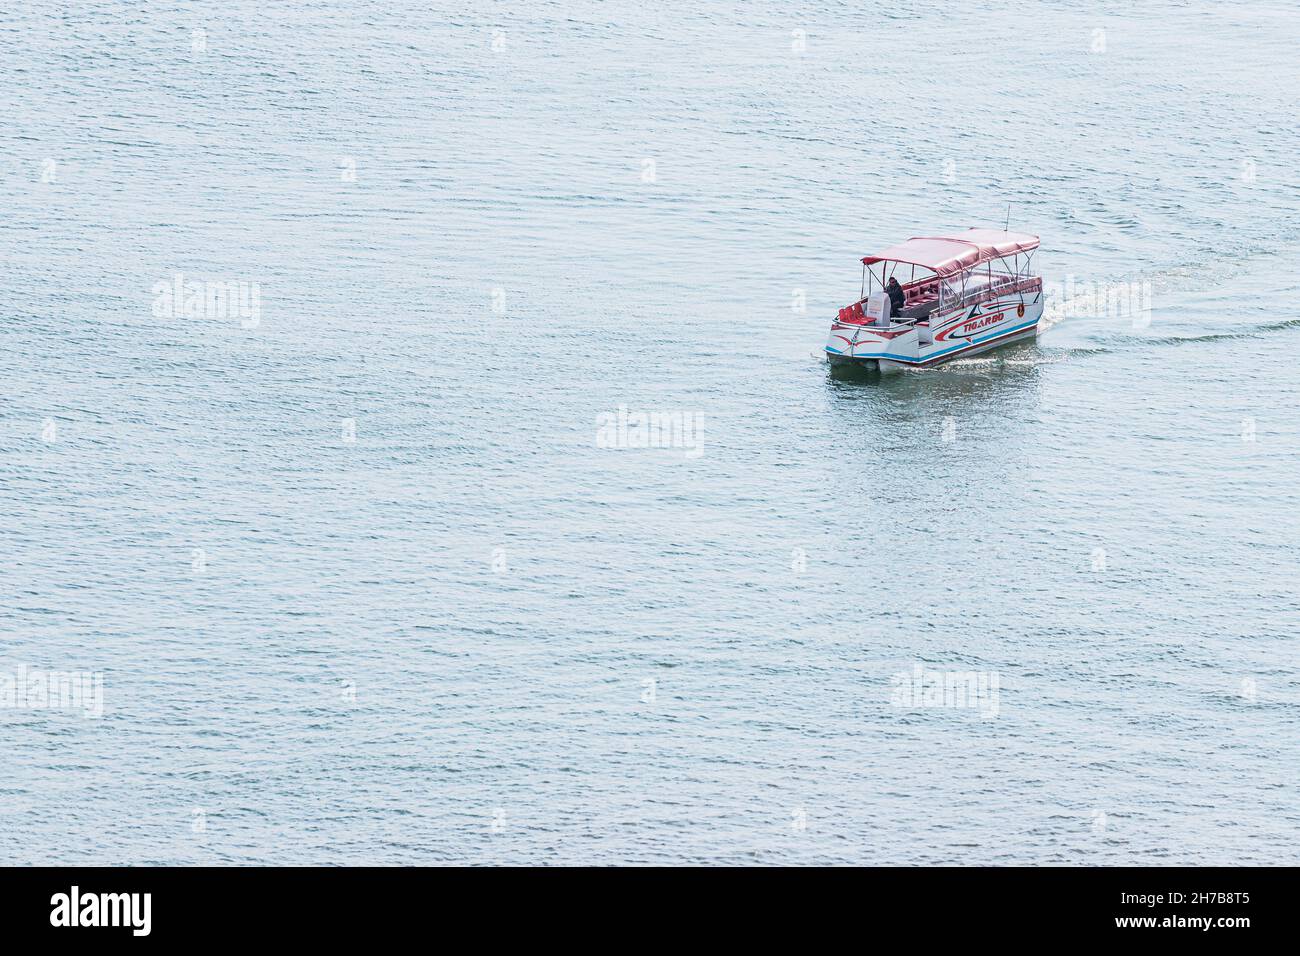 23 May 2021, Sevan, Armenia: pleasure boat without for tourists during bad weather on Lake Sevan in Armenia. Tigarbo caption on the ship Stock Photo